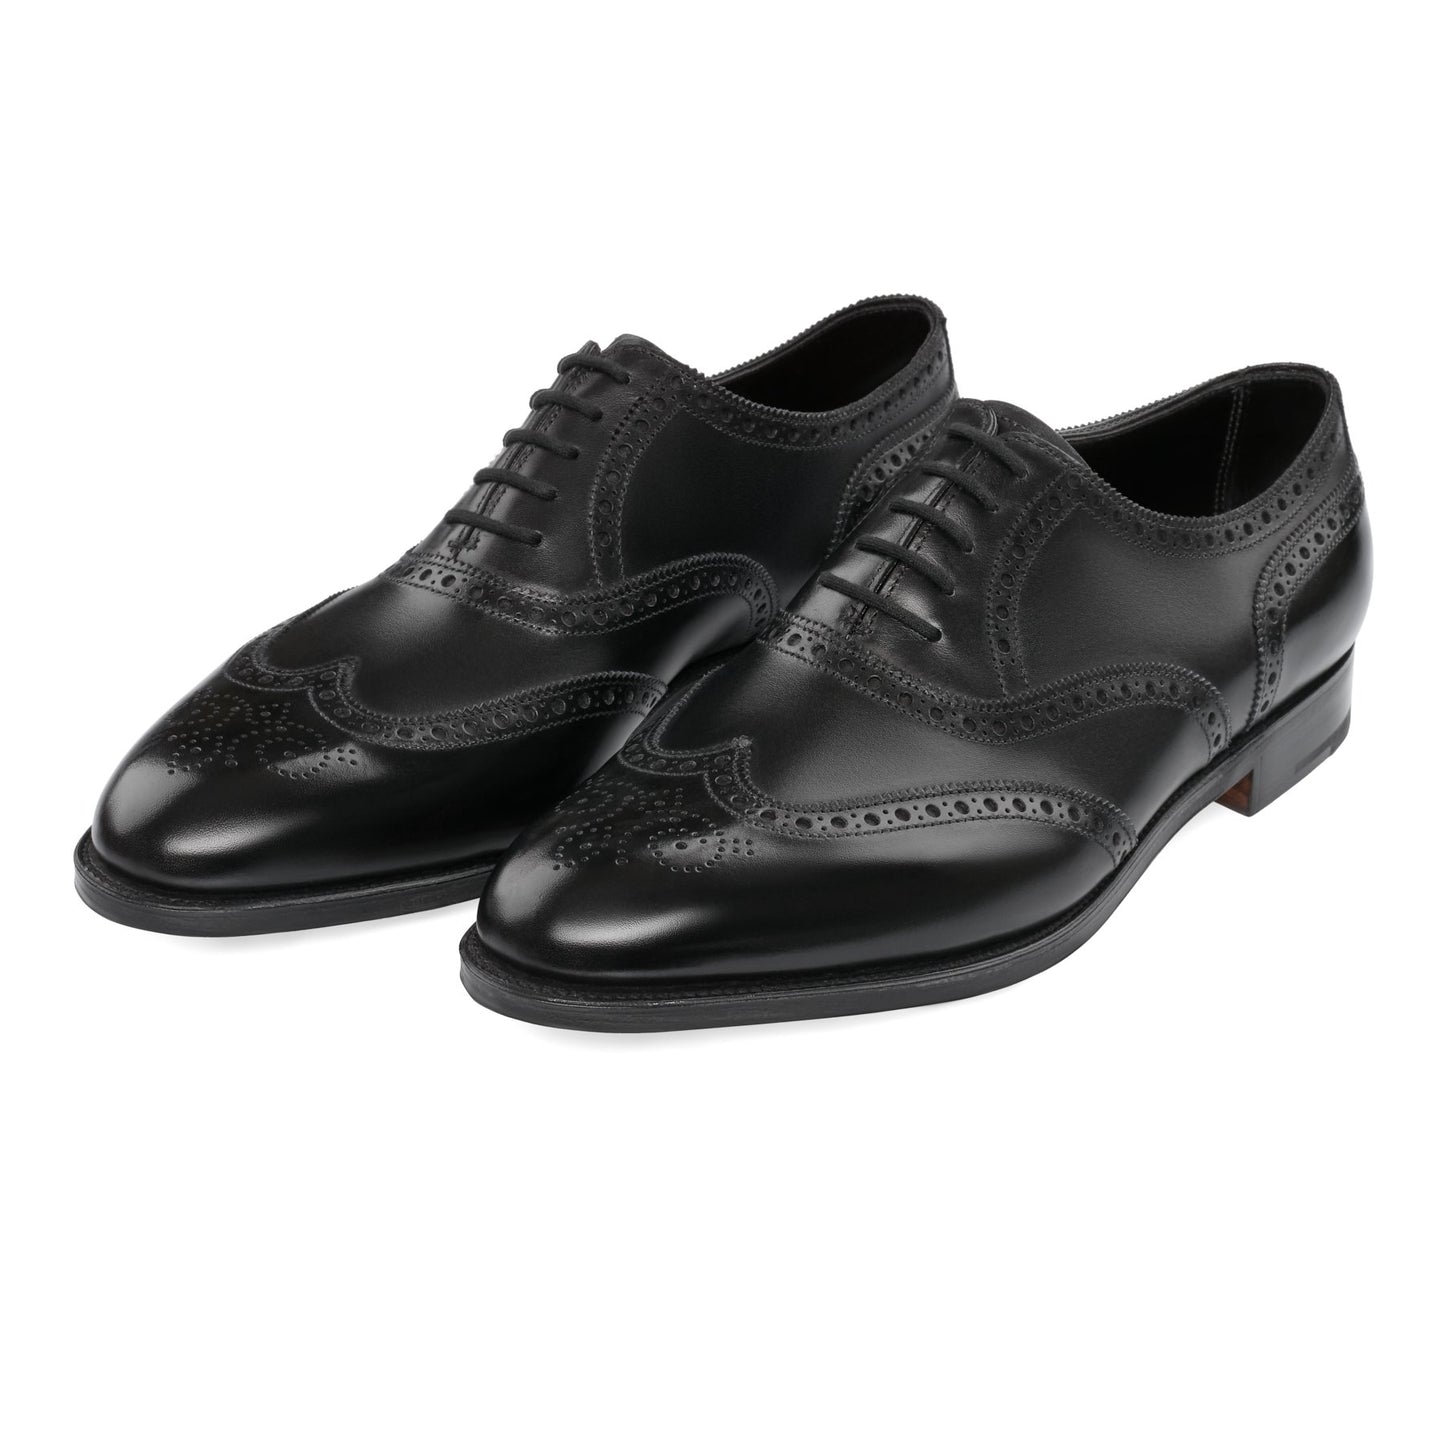 John Lobb "Stowey" Five-Eyelet Oxford with Perforated Details and Medallion in Black - SARTALE